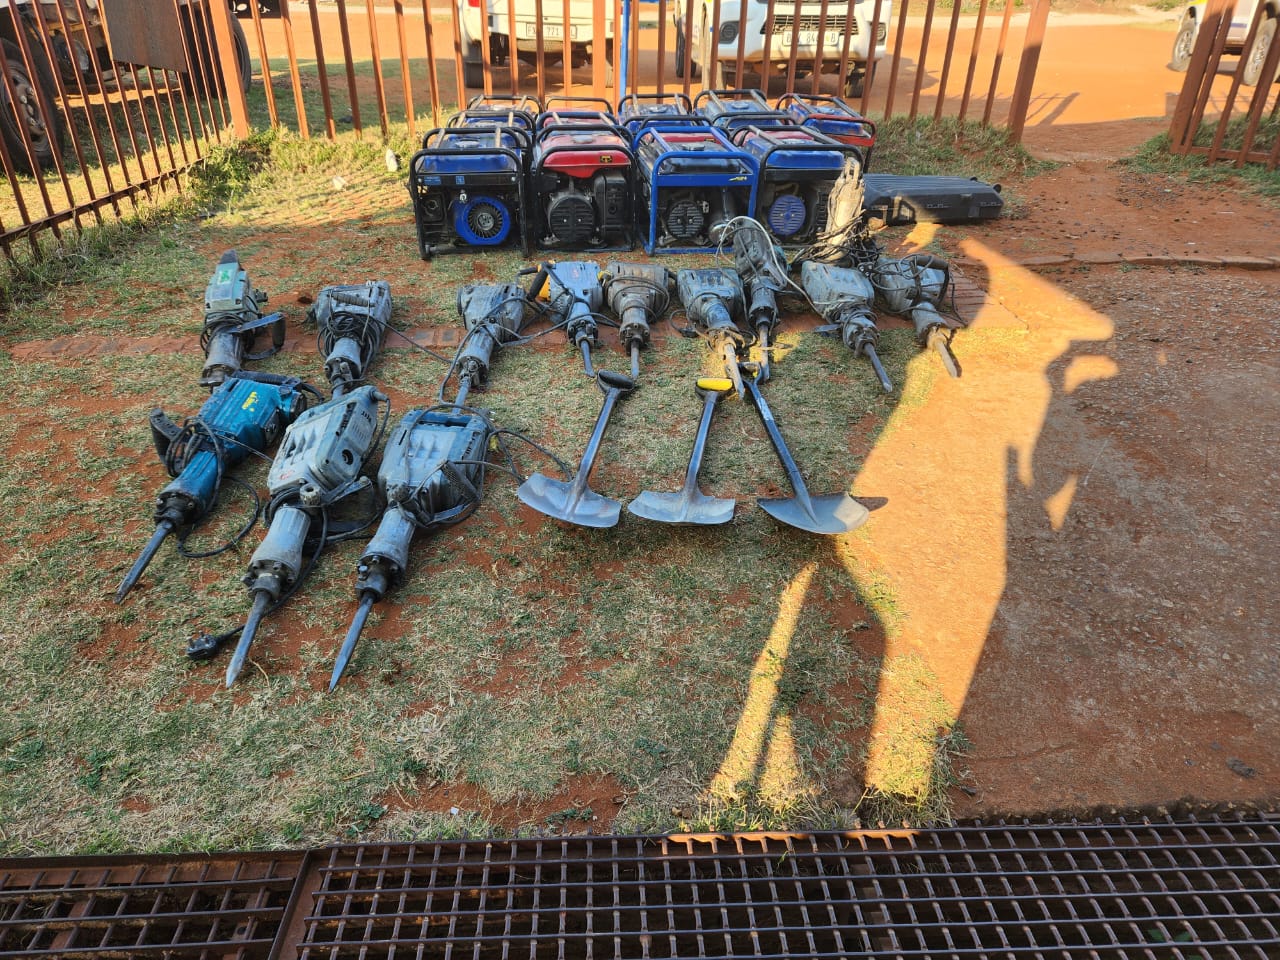 HAWKS SEIZE MORE MINING EQUIPMENT DURING ONGOING ILLEGAL MINING DISRUPTIVE OPERATION